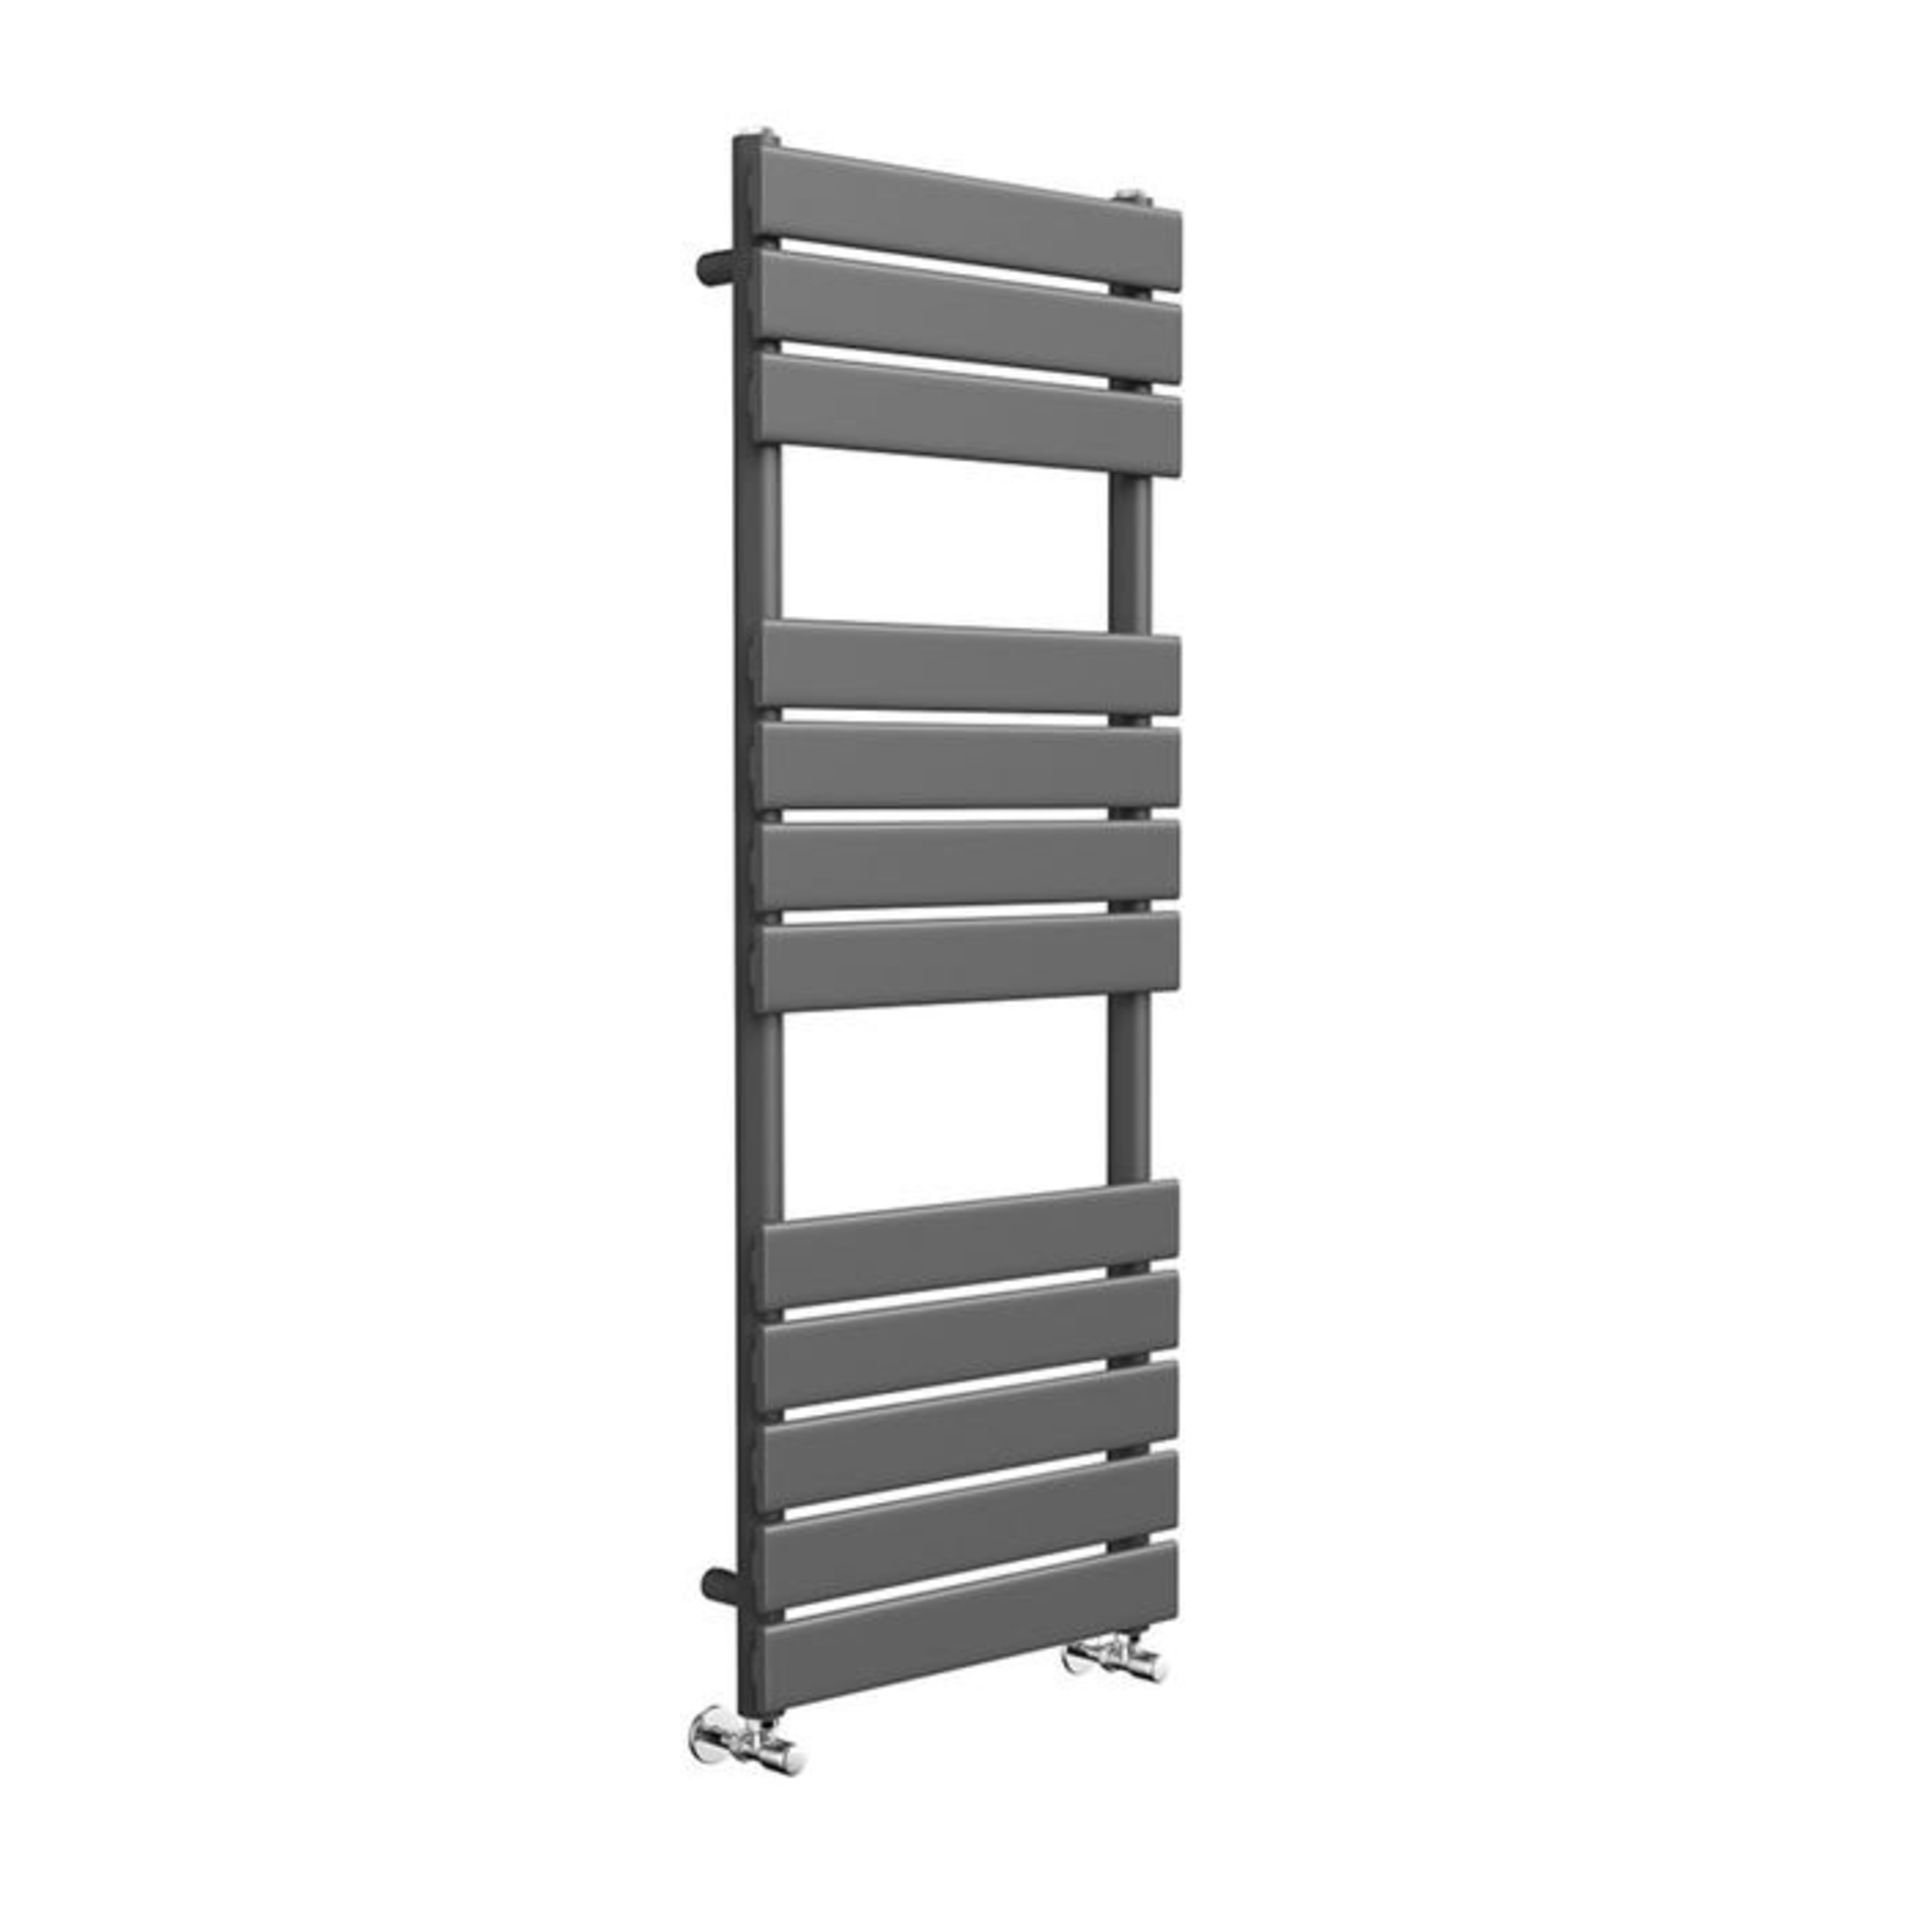 (H47) 1200x450mm Anthracite Flat Panel Ladder Towel Radiator RRP £349.99 Made with low carbon